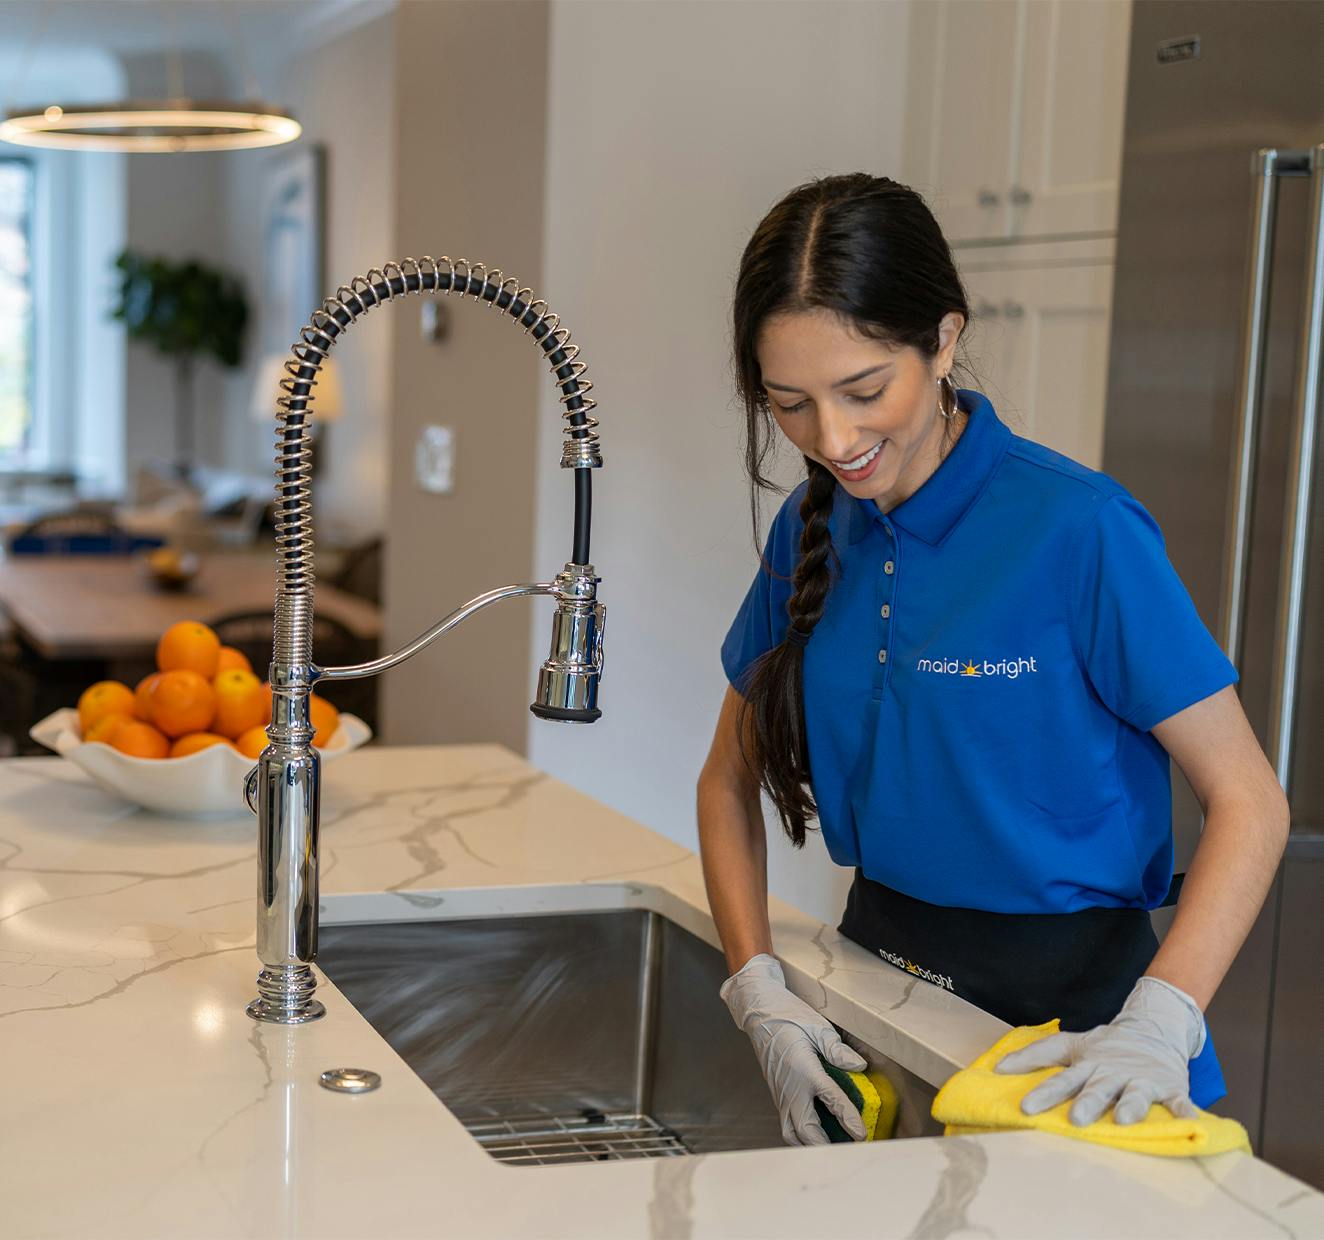 Maid-Bright-Professional-House-Cleaning-Service-Recurring-Cleaning-Peace-Of-Mind-Woman-Cleaning-Sink